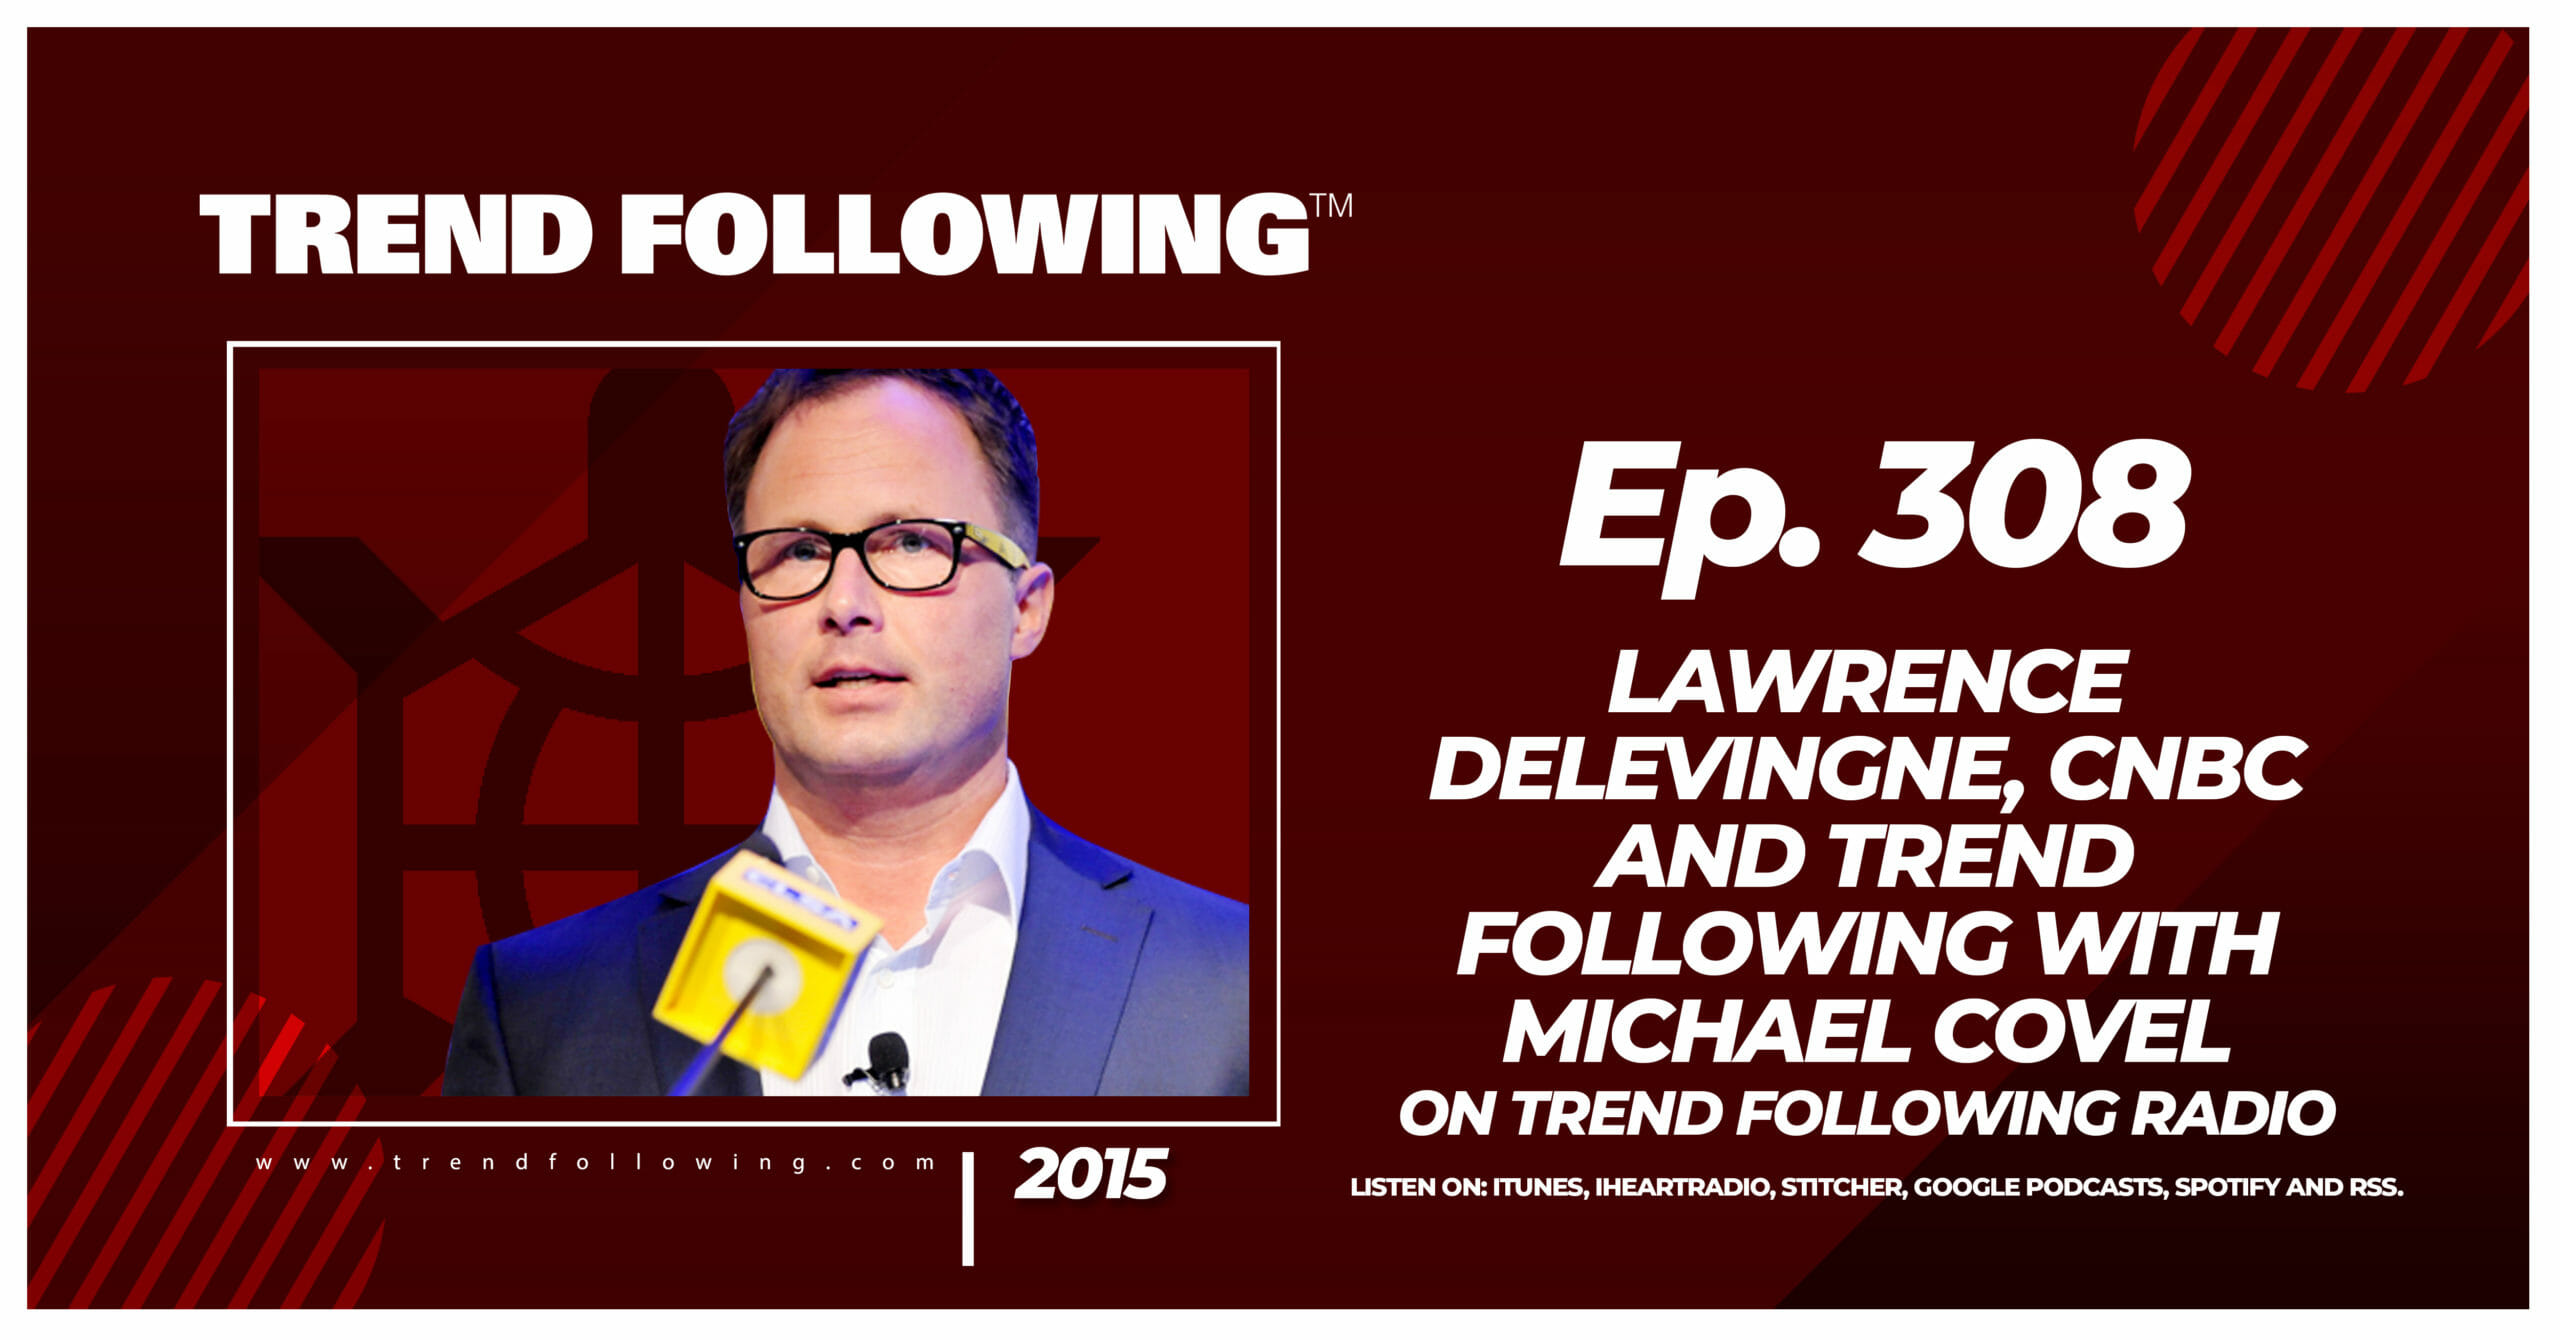 Lawrence Delevingne, CNBC and Trend Following with Michael Covel on Trend Following Radio